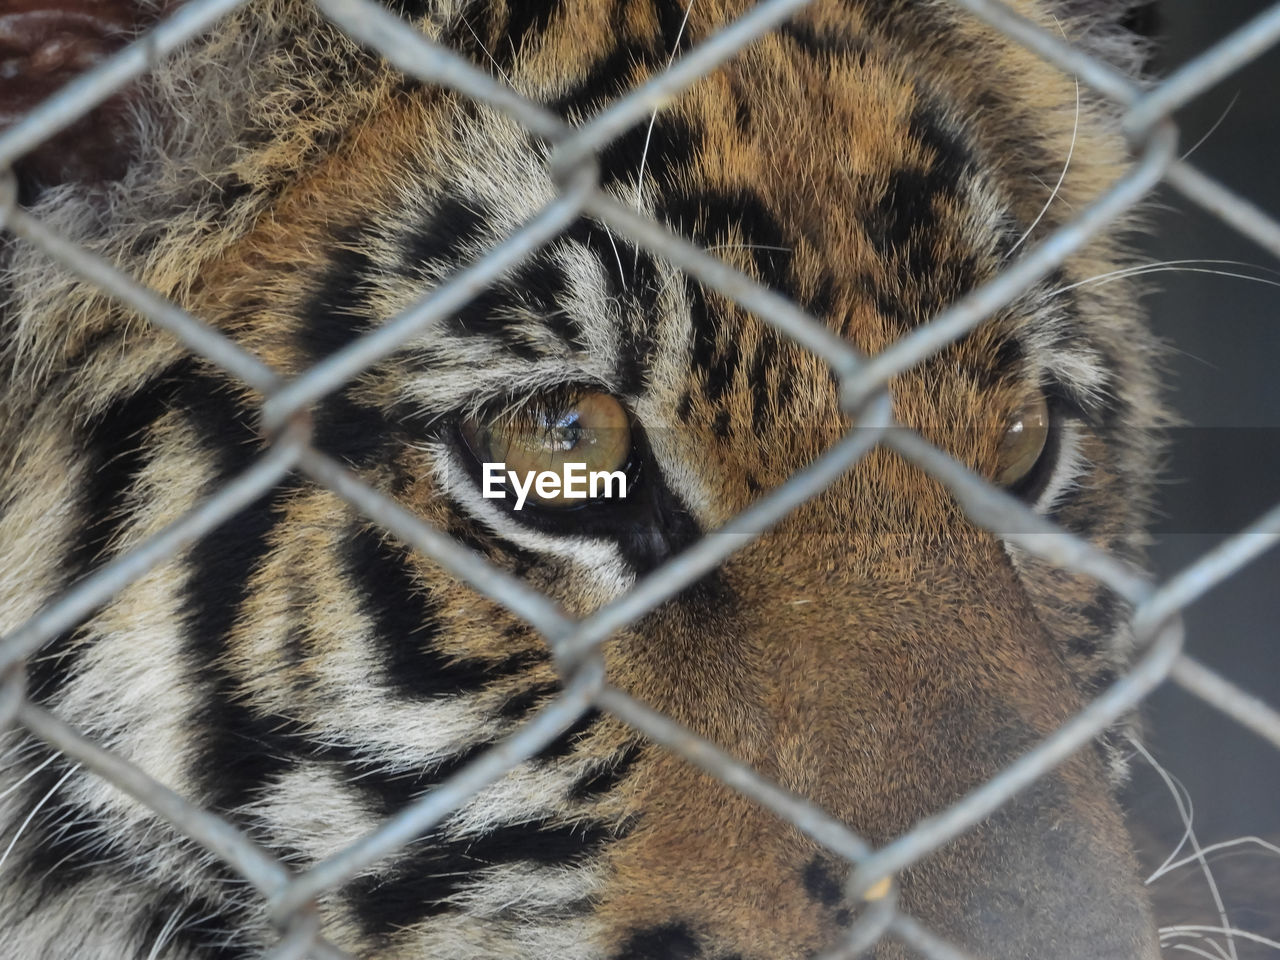 Close up of tiger 's eye behind the cage of the zoo.